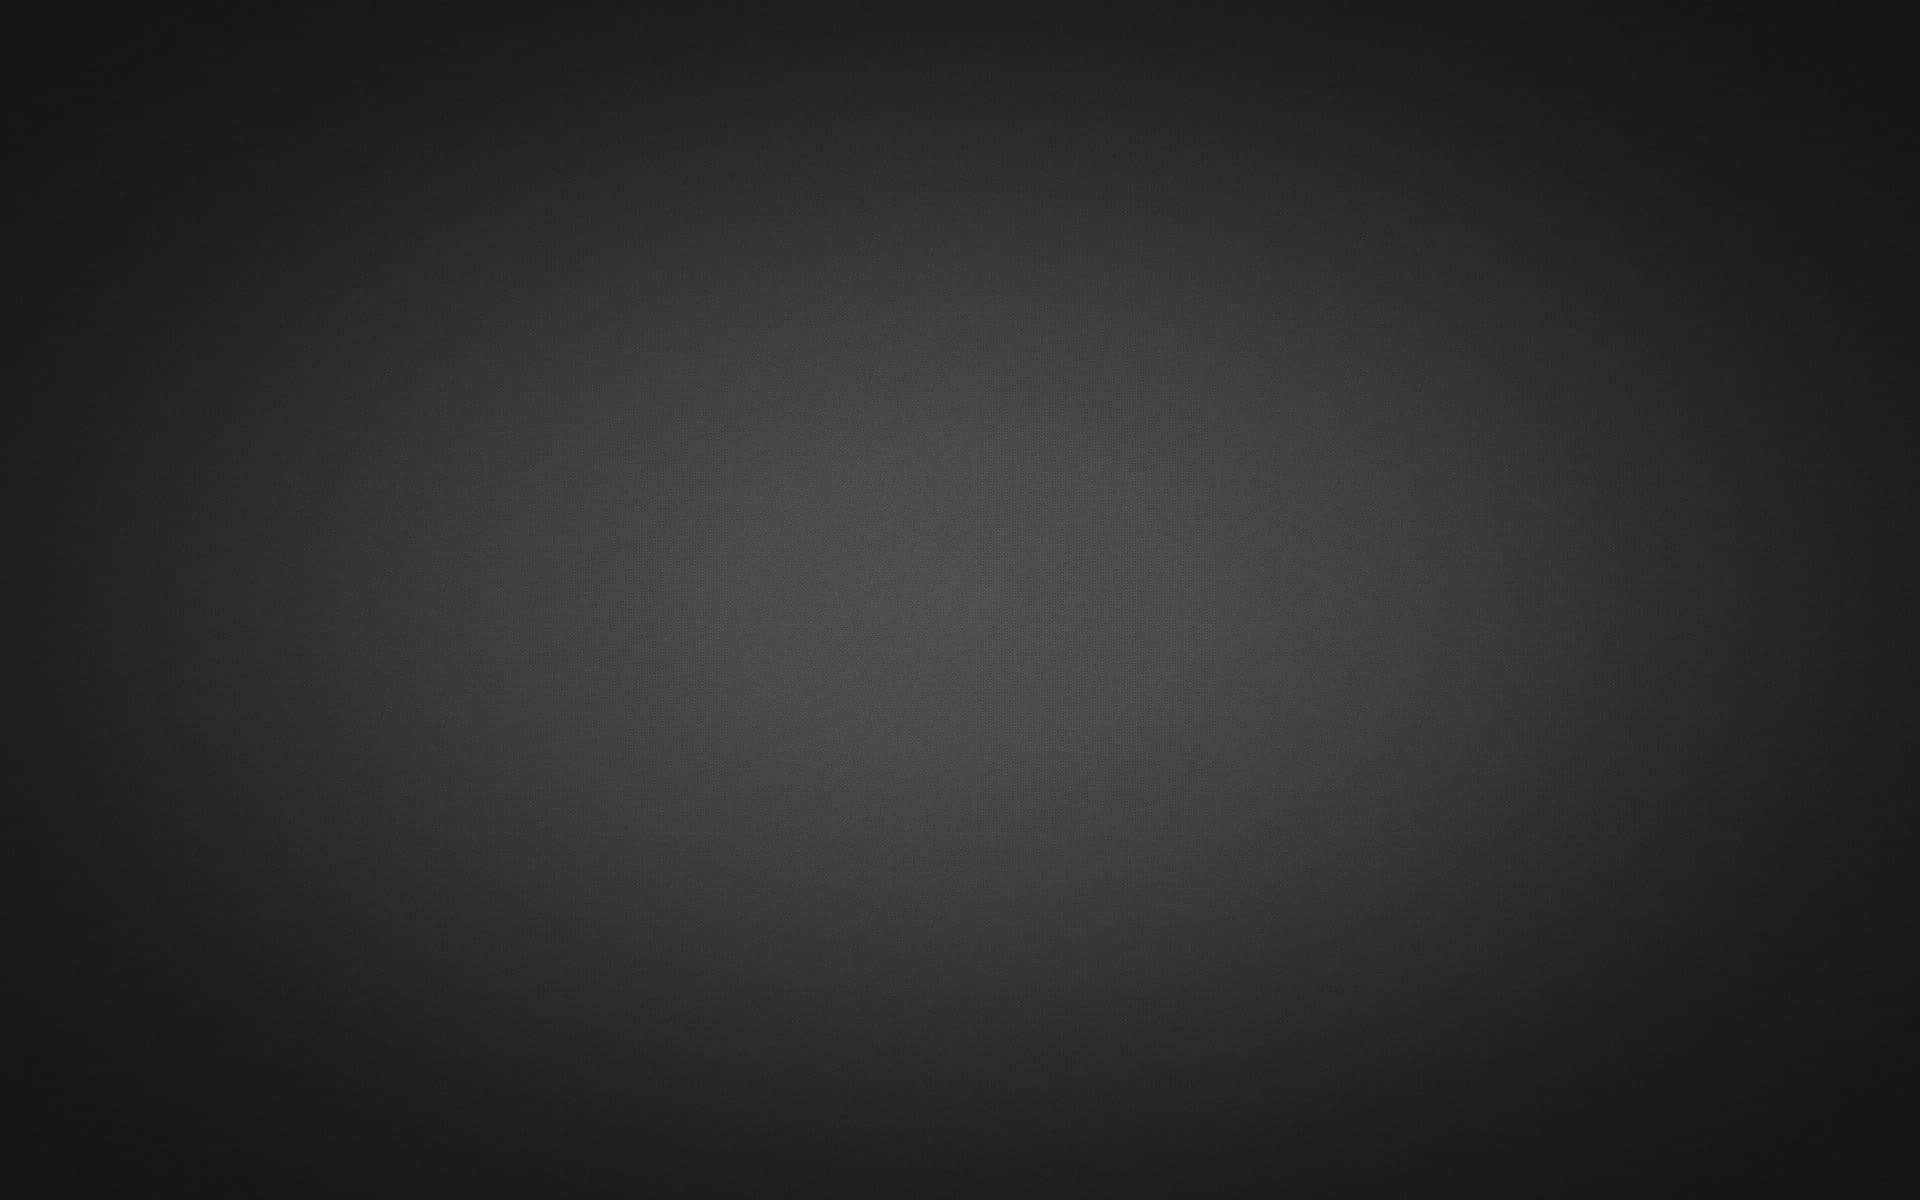 A Dark and Mysterious Gradient Background